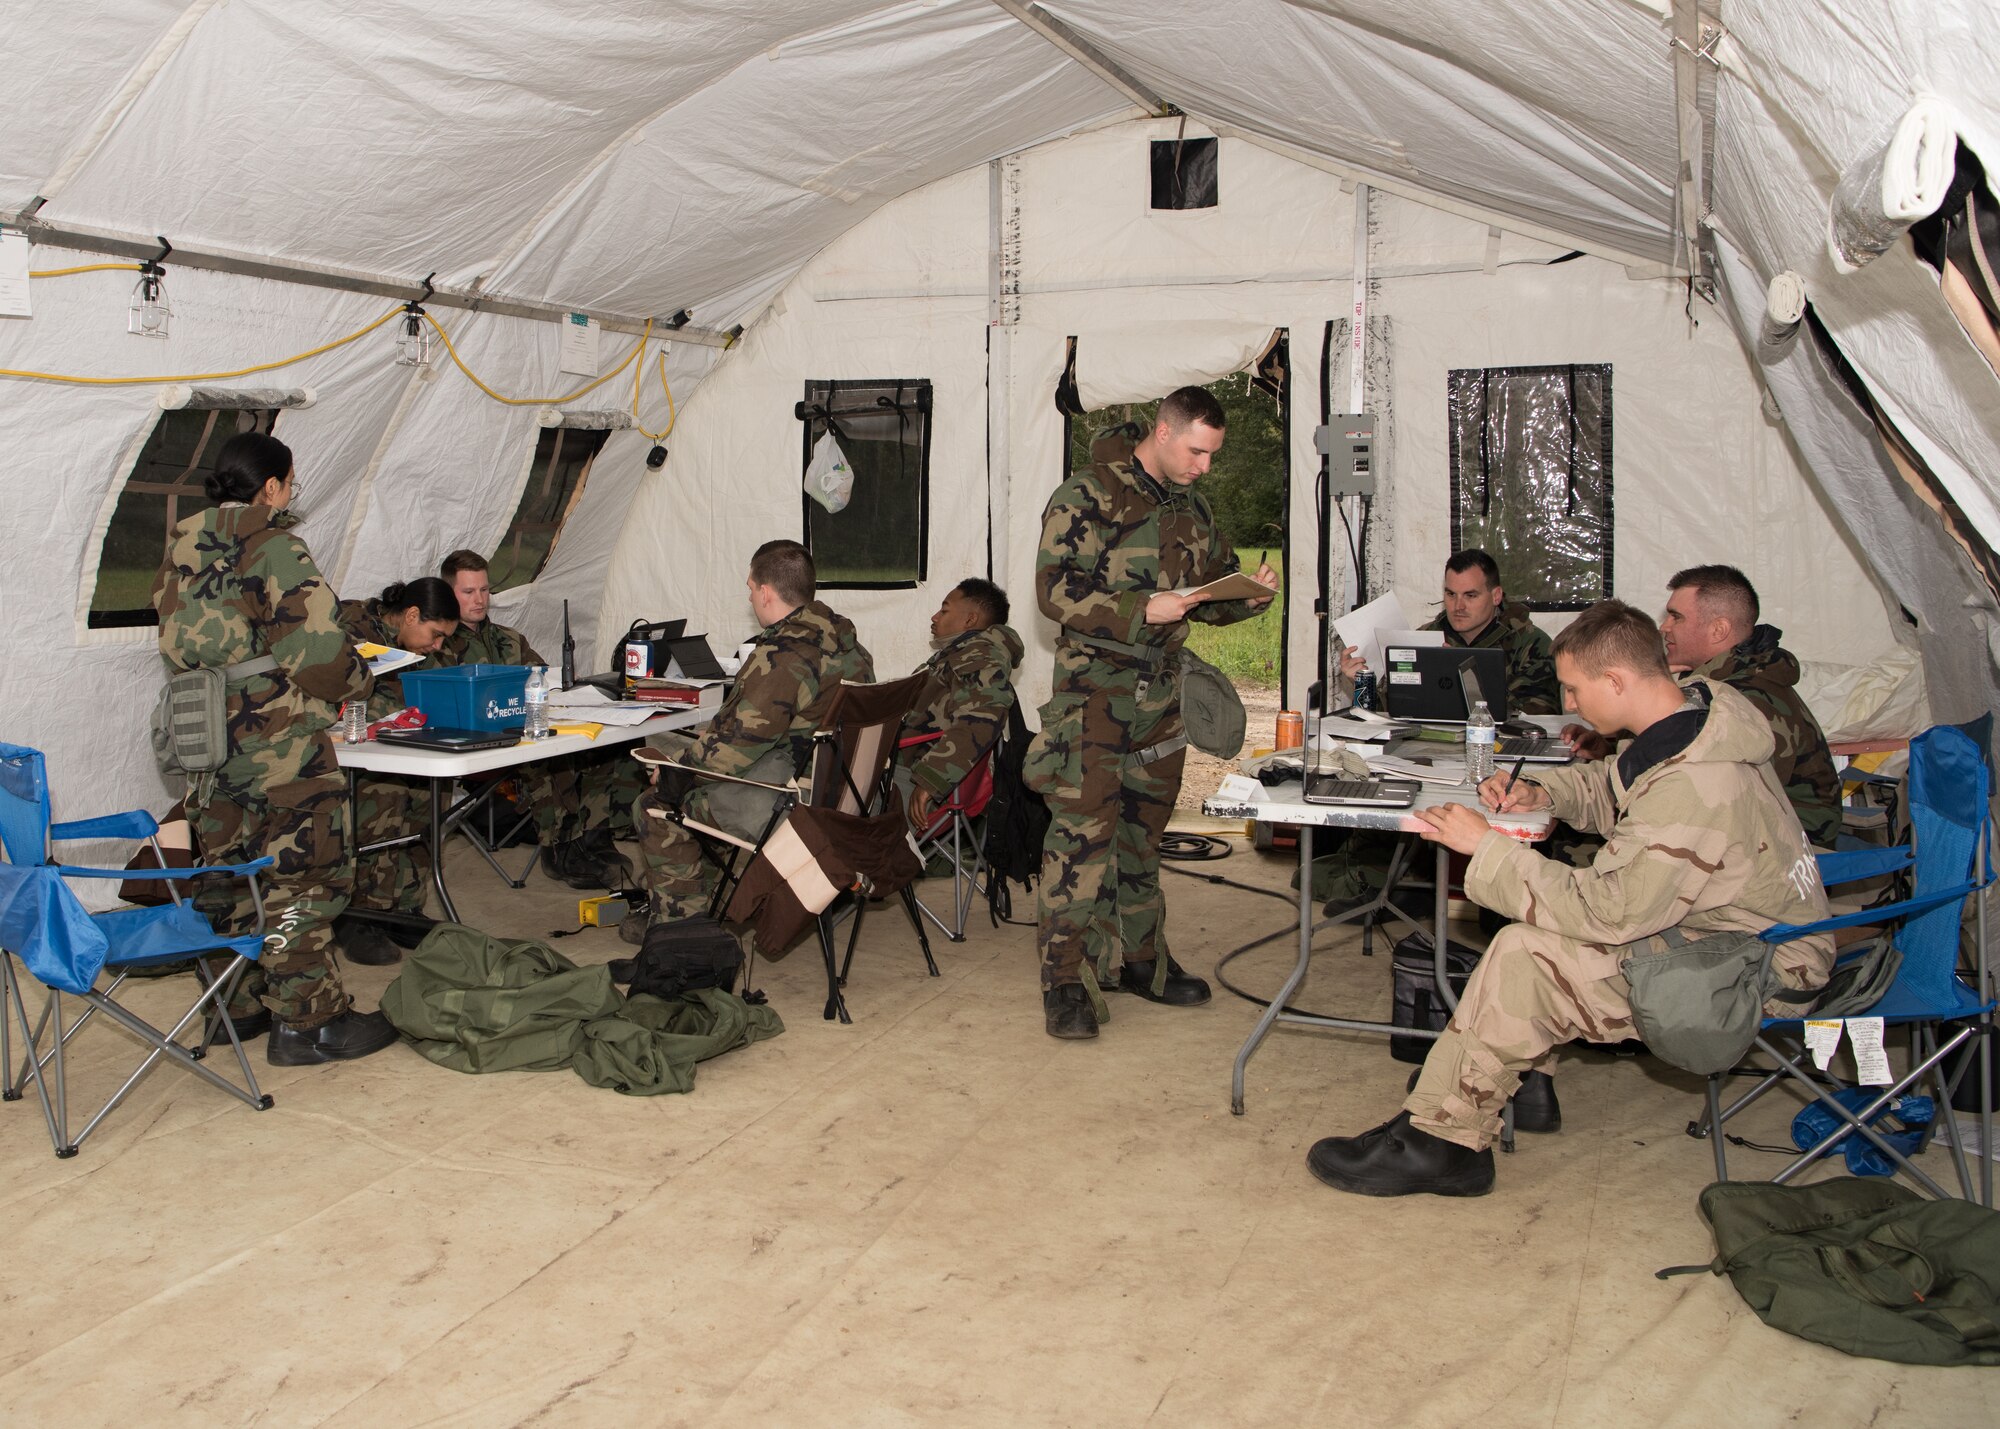 Contracting administrators with the 509th Contracting Squadron process contracts during a mock deployment exercise on Oct. 9, 2019, at Whiteman Air Force Base, Missouri. The Airmen split into two separate teams throughout the exercise, testing their skills and allowing them to compete with each other to build morale and ensure readiness. (U.S. Air Force photo by Airman 1st Class Parker J. McCauley)